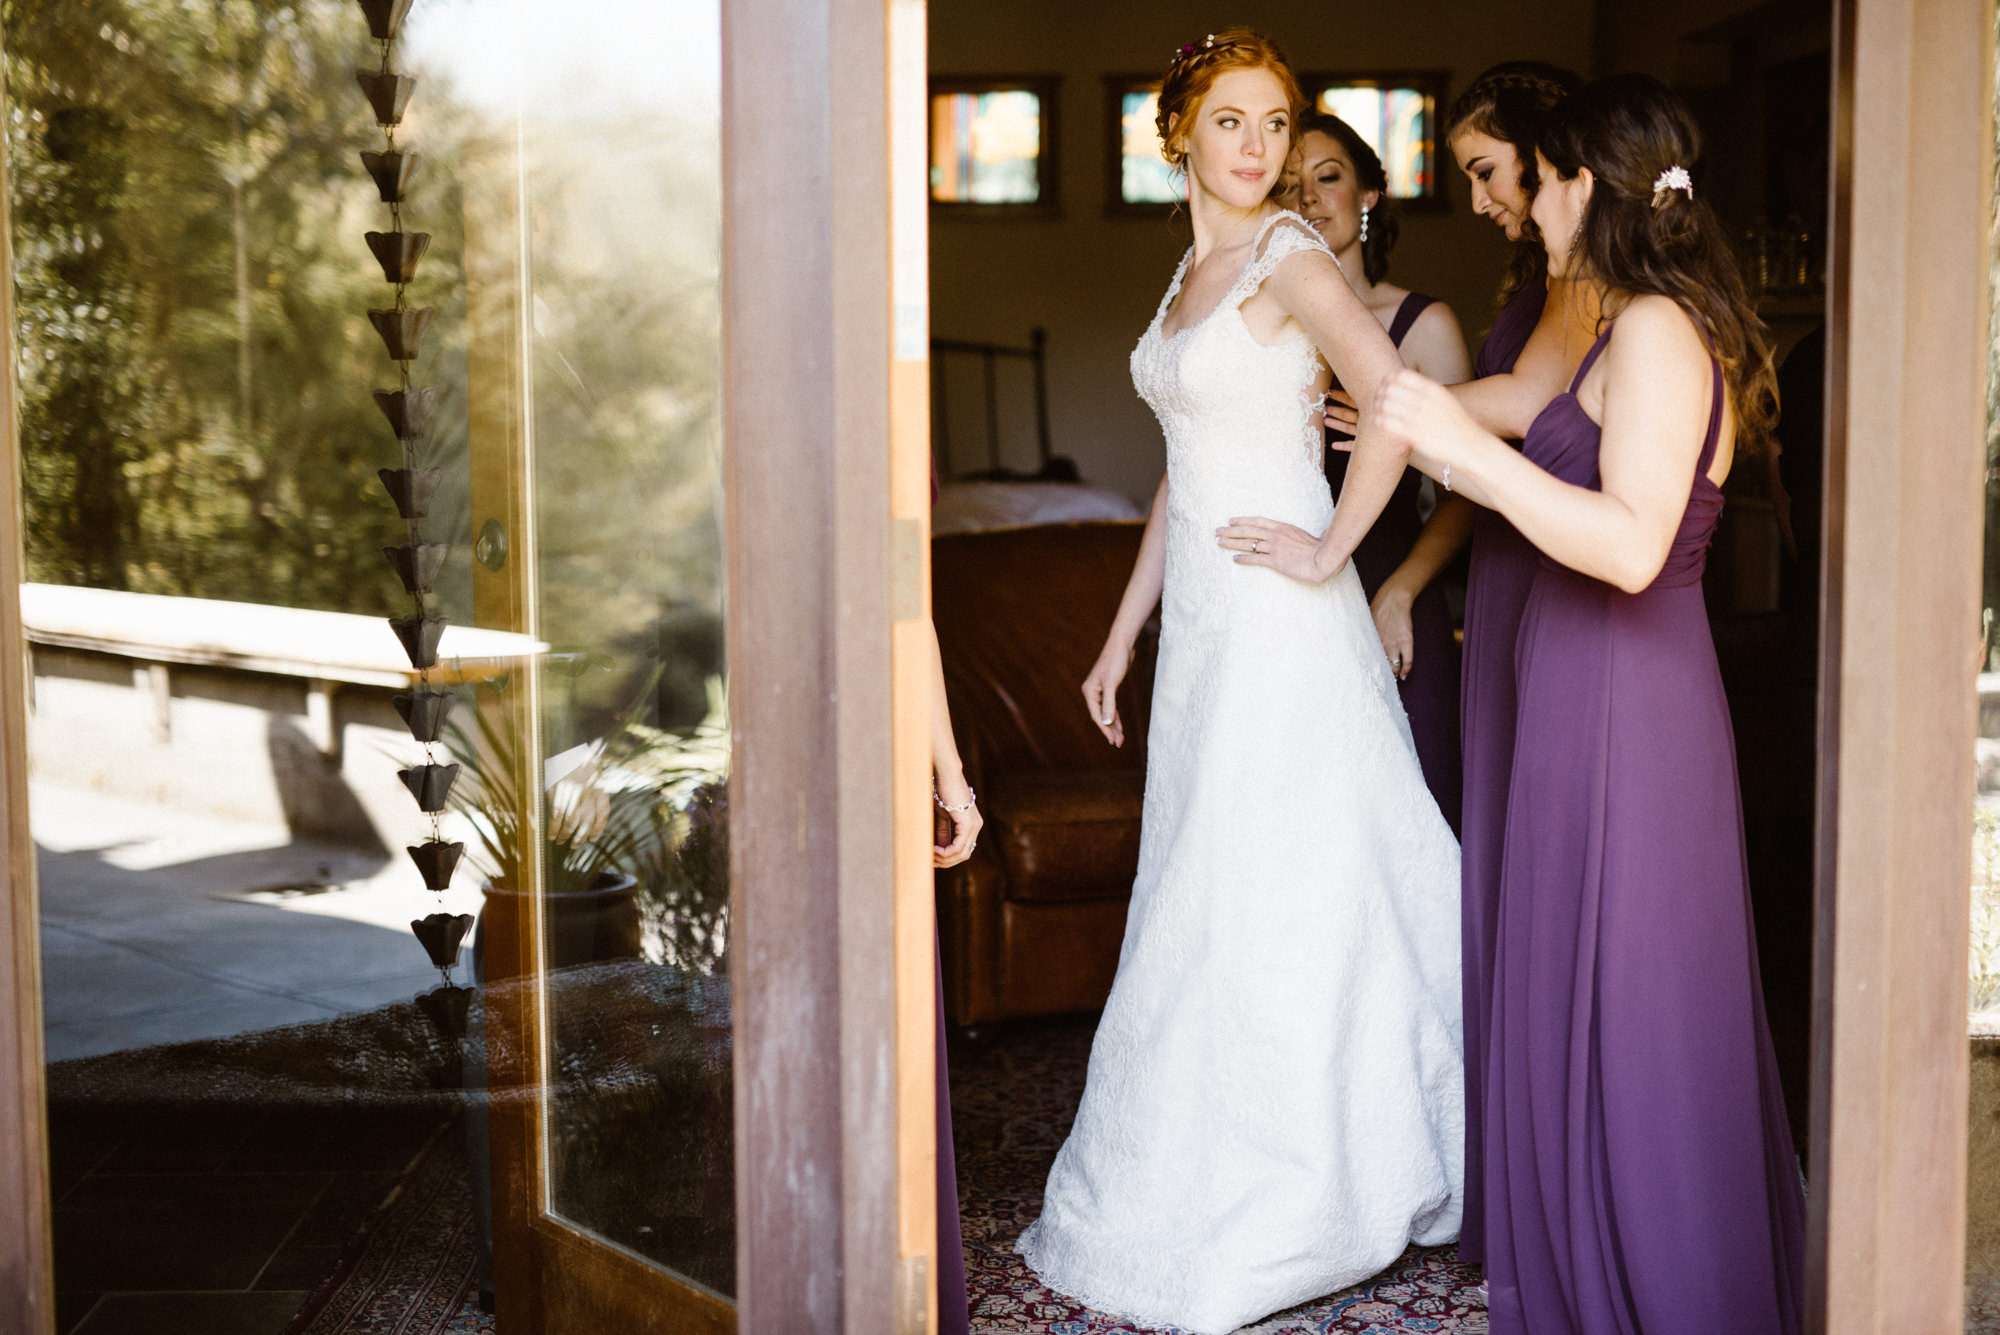 Katherine getting ready with her bridesmaids at Kingston House, a wedding venue in Kingston, Washington.